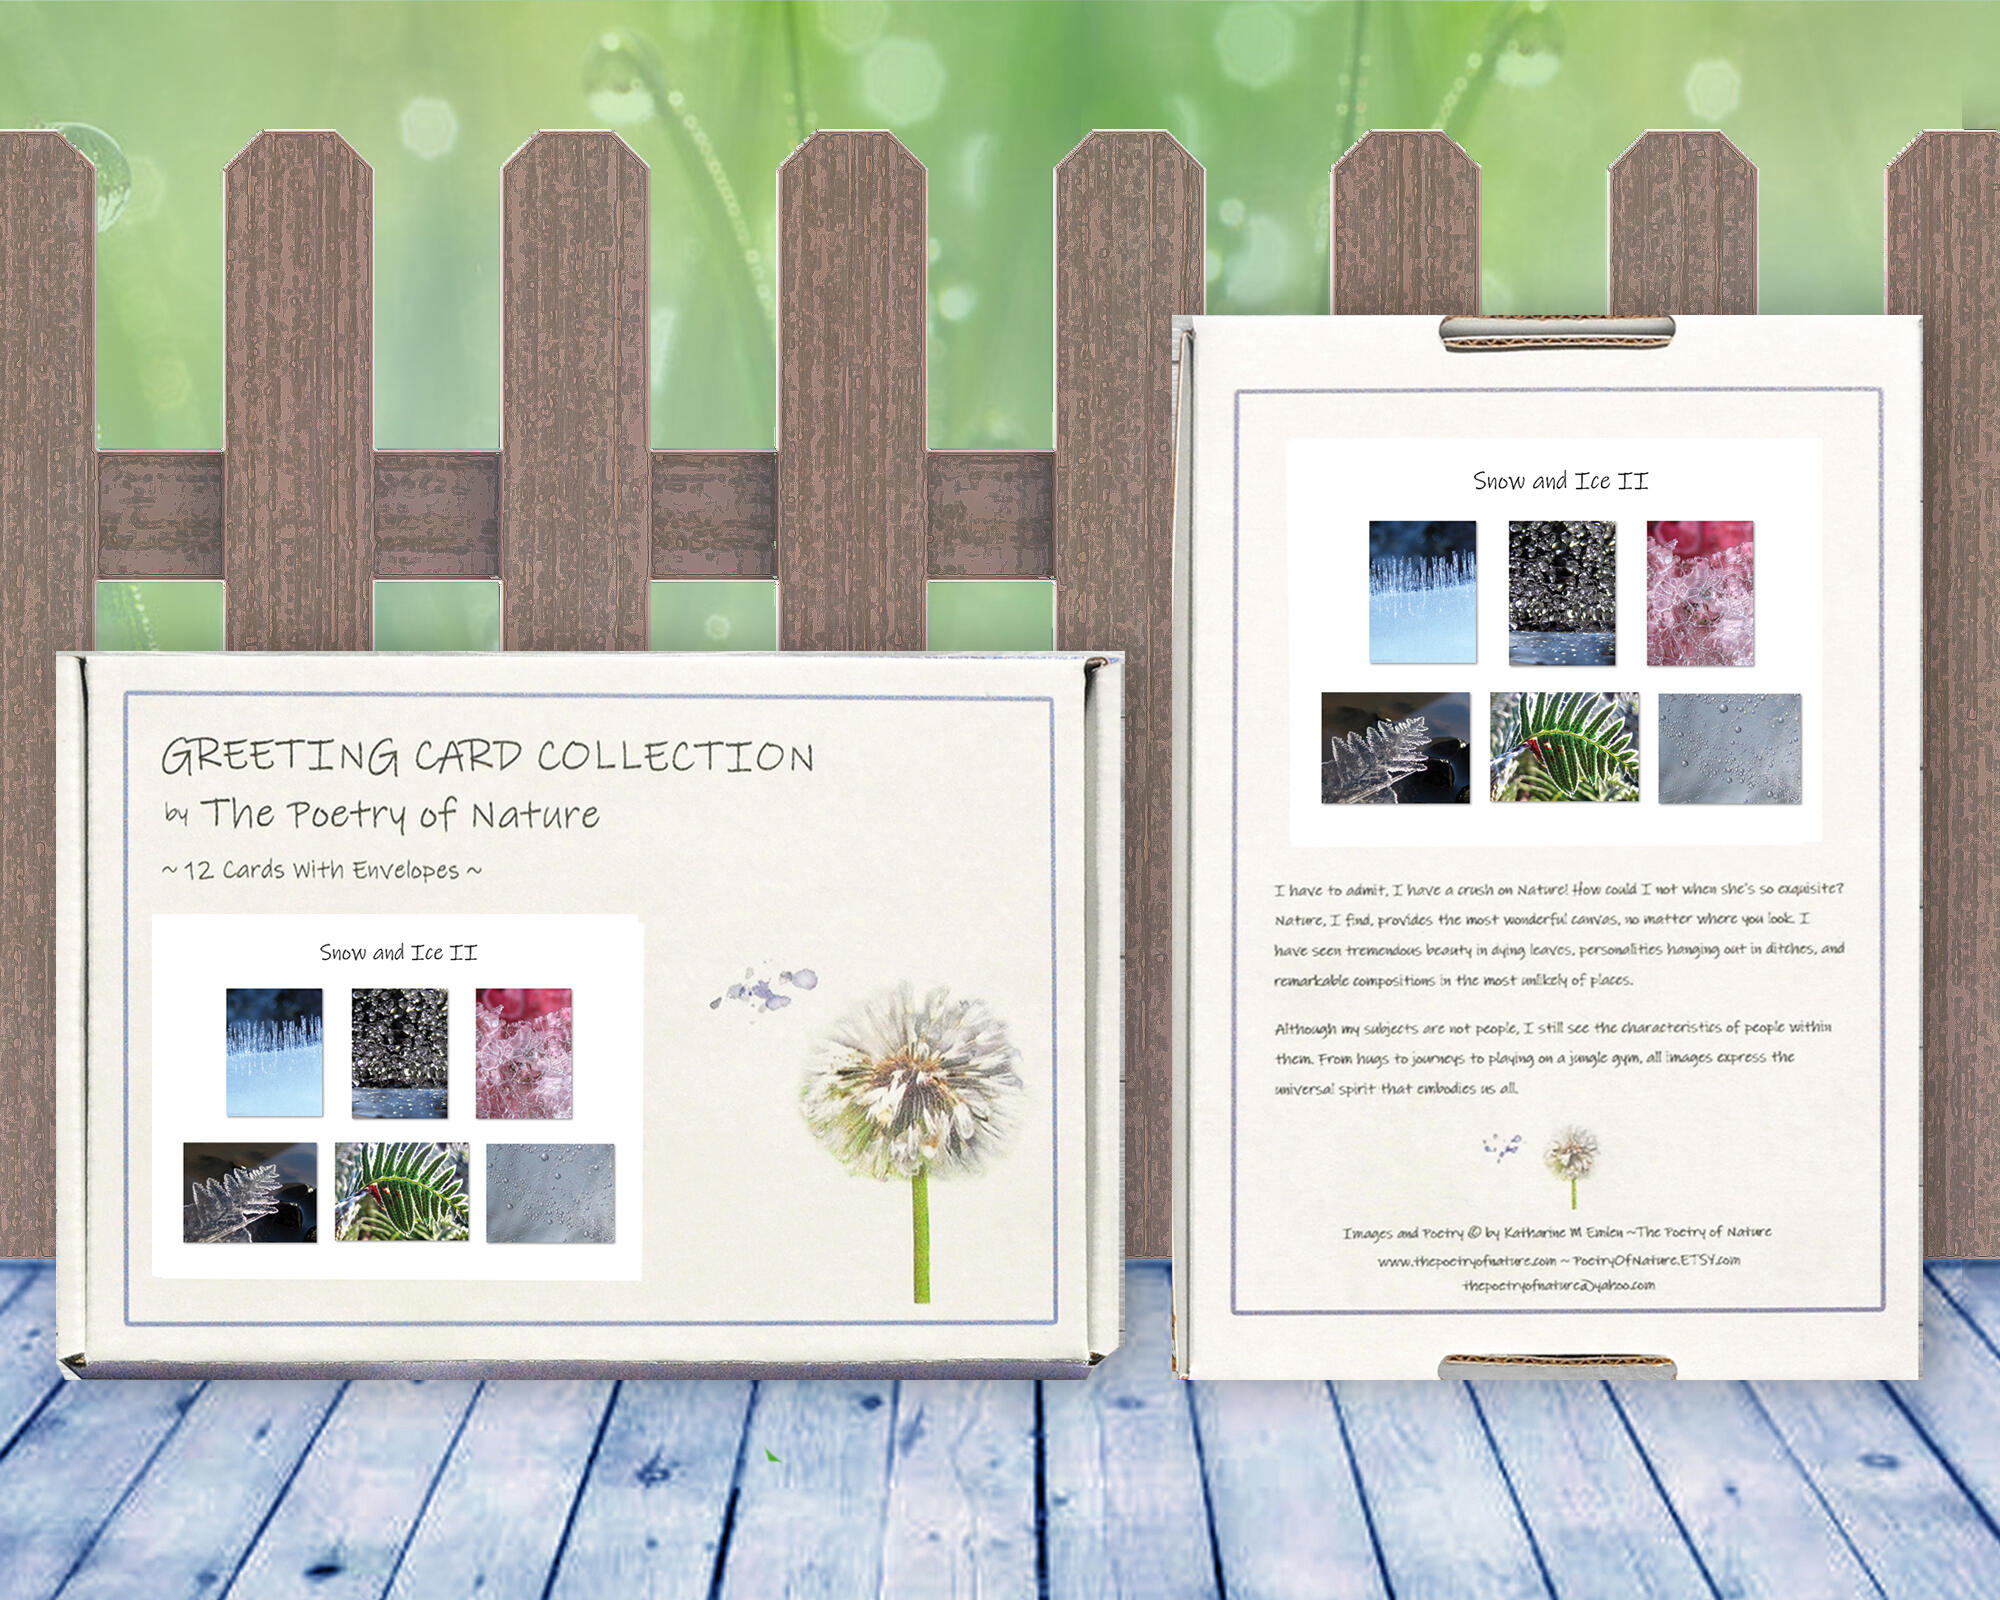 Snow and Ice II - Greeting Card Collection by The Poetry of Nature